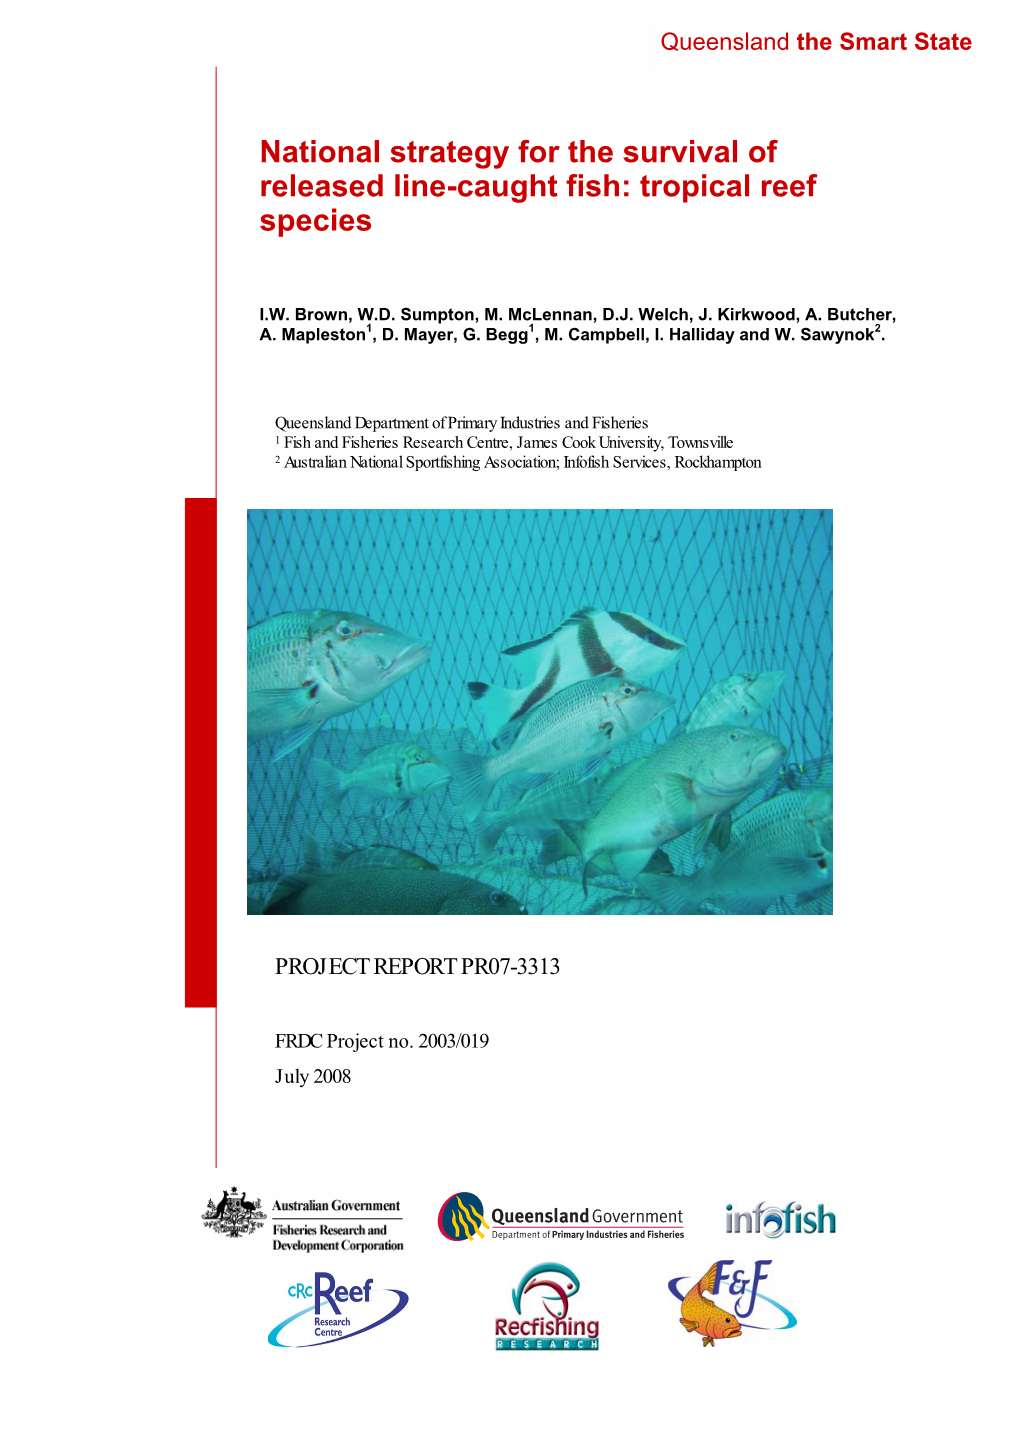 National Strategy for the Survival of Released Line-Caught Fish: Tropical Reef Species